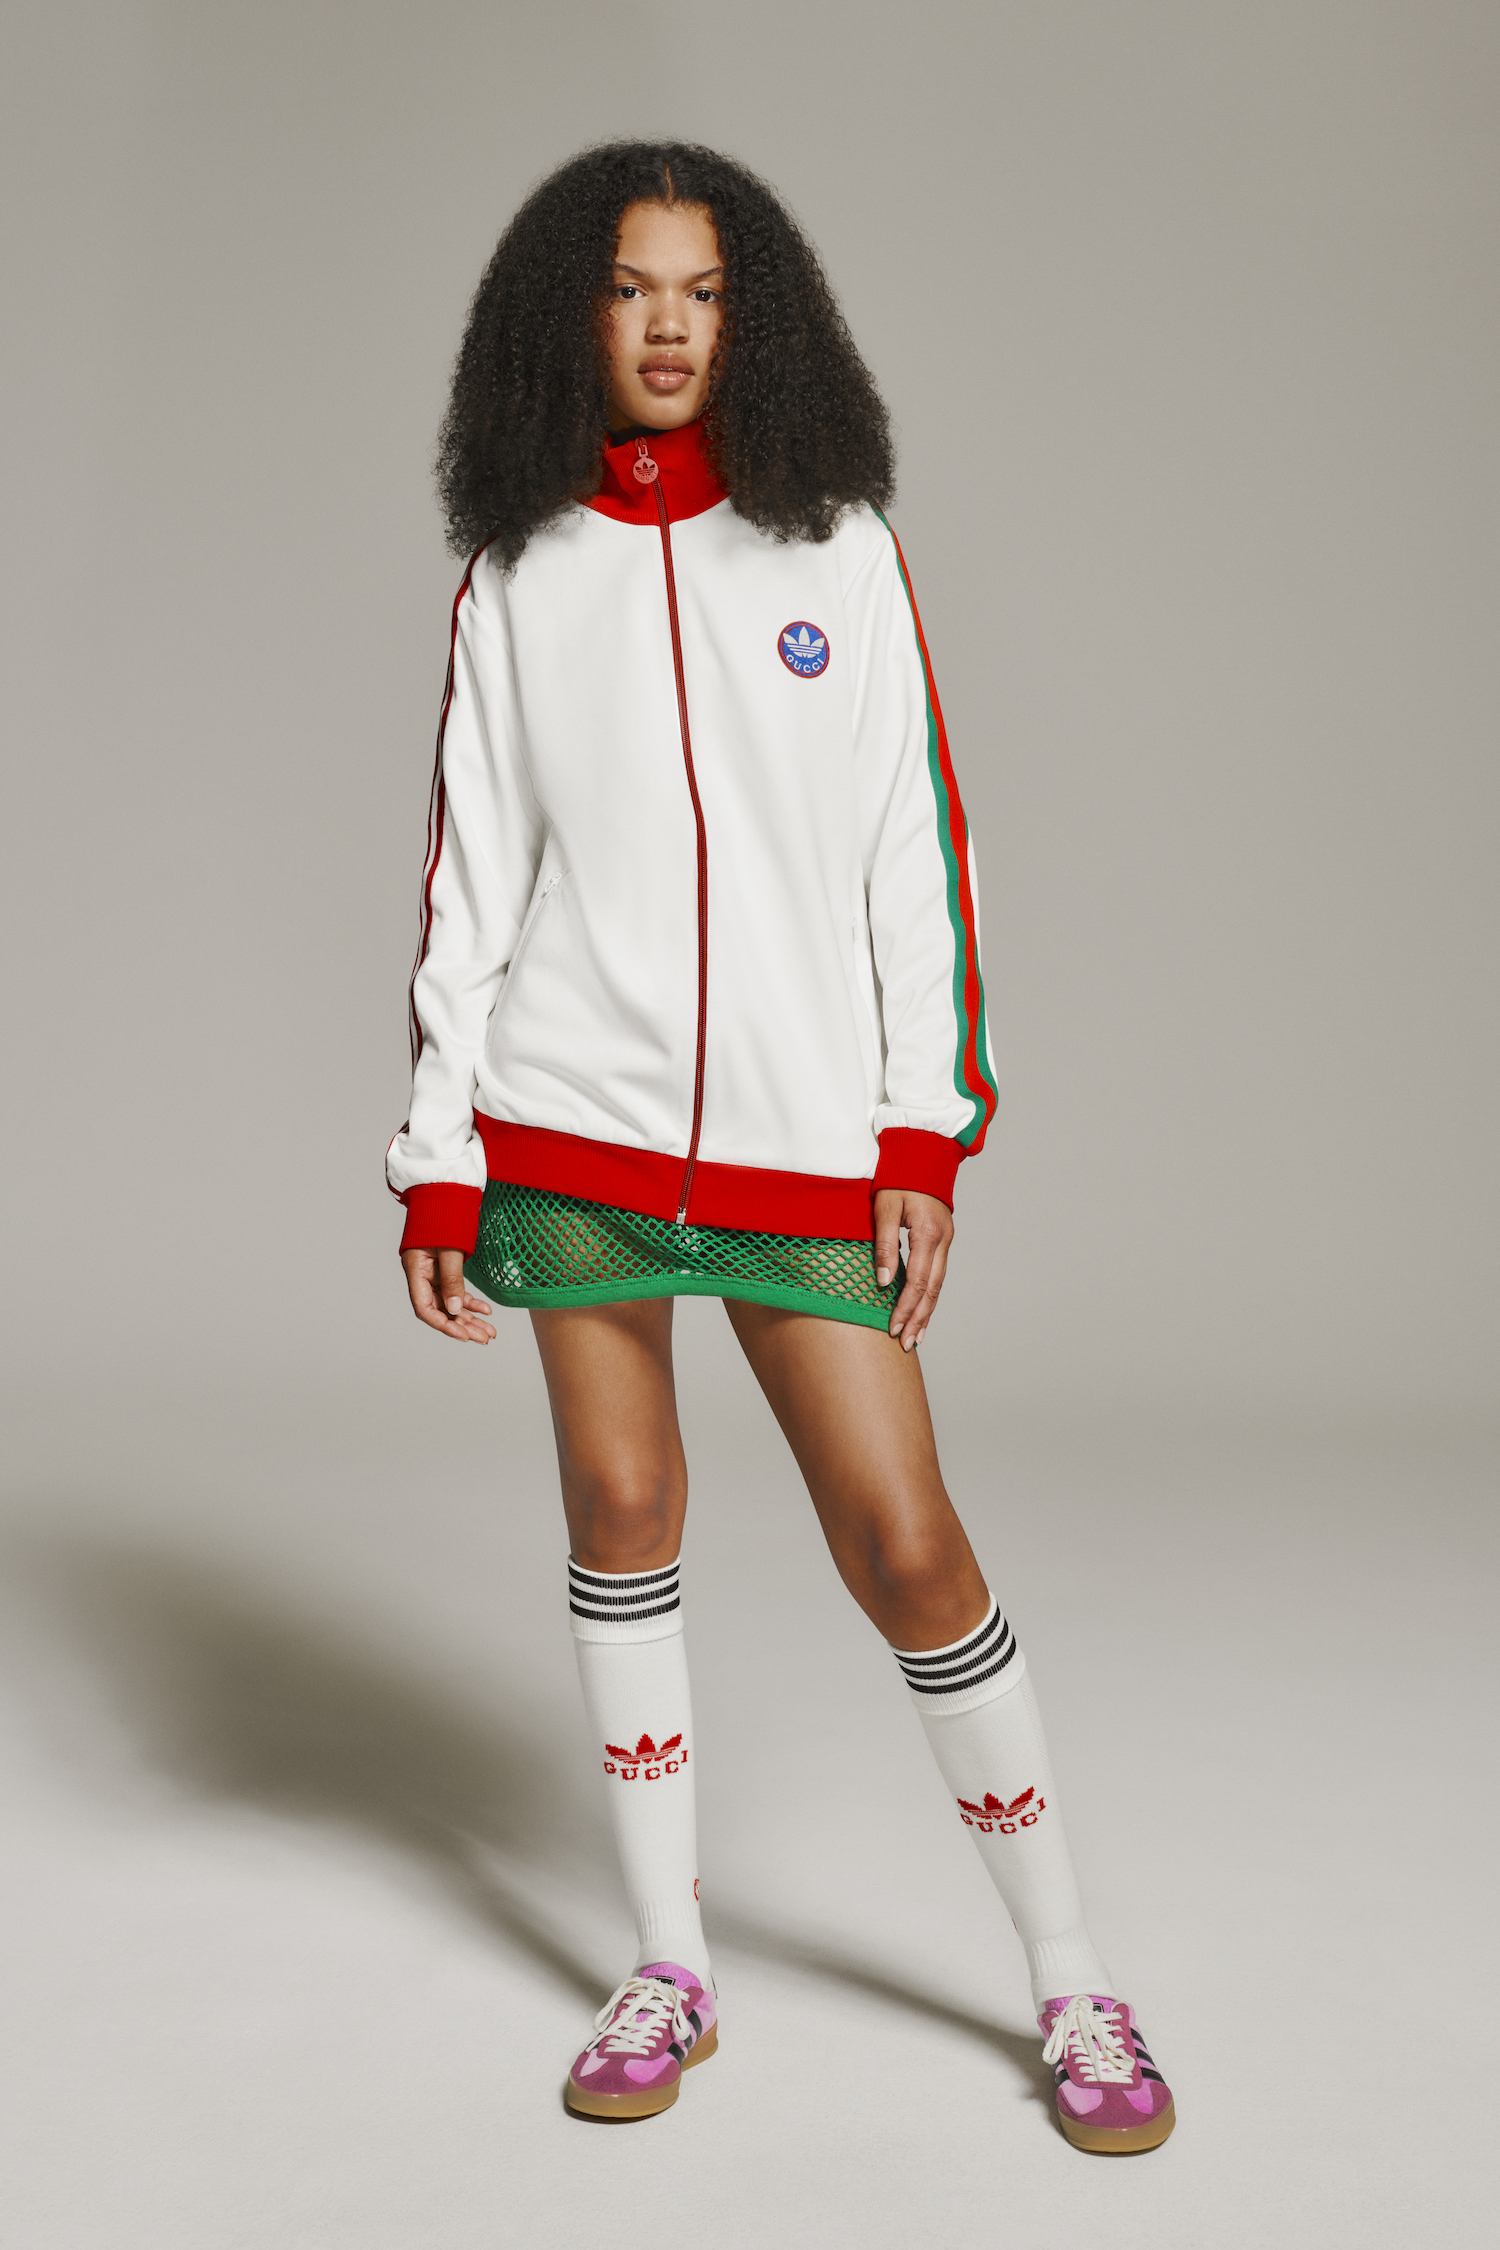 adidas x Gucci bring you future fashion artefacts - One of the 